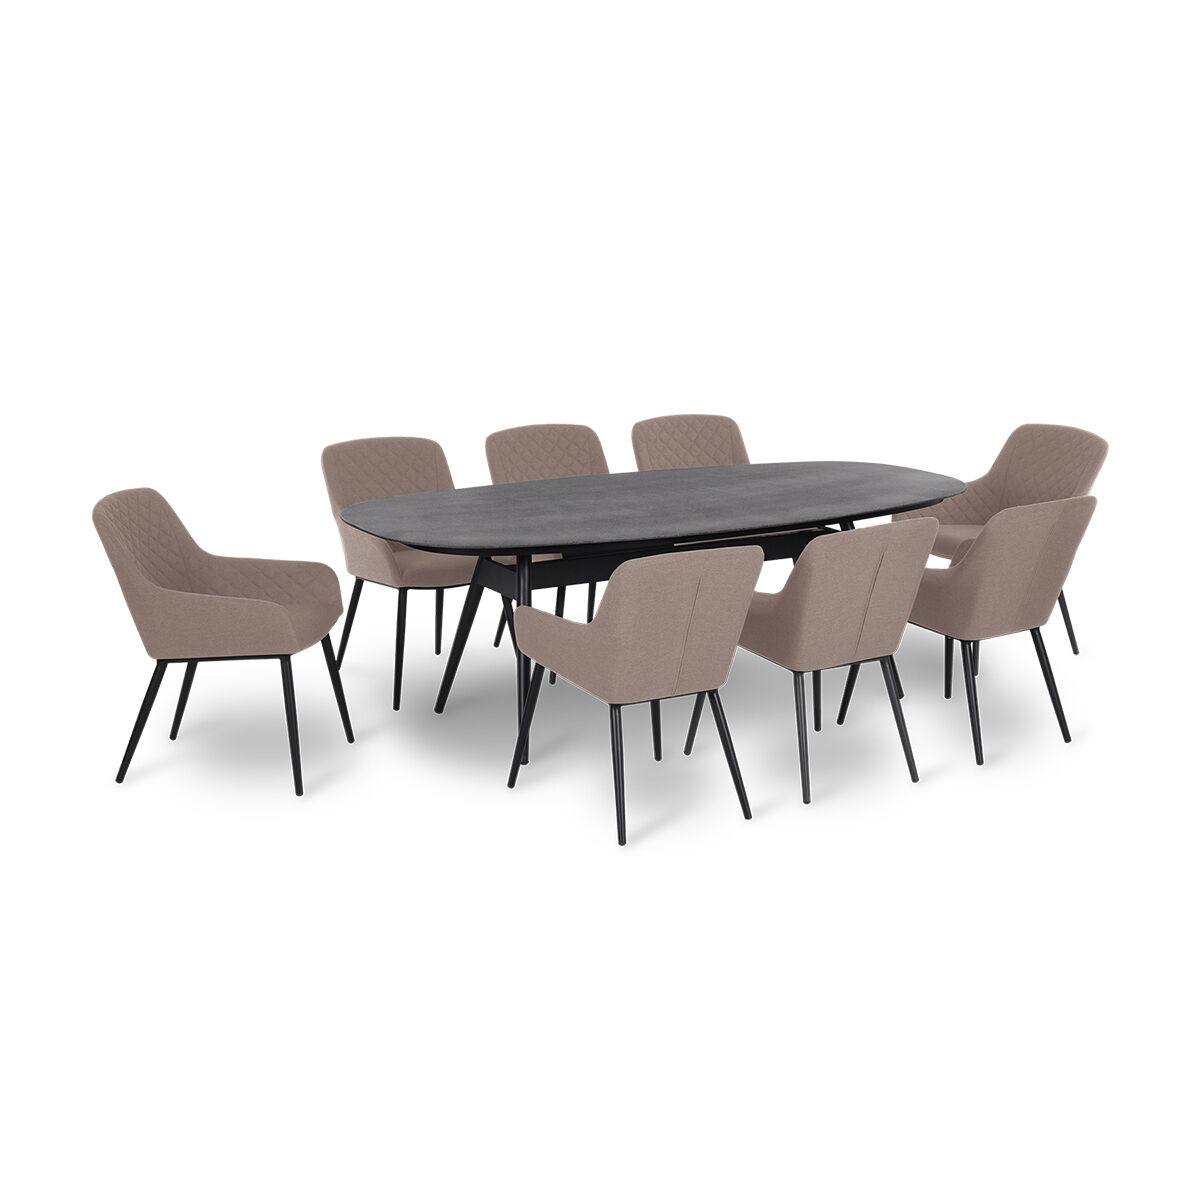 Maze - Outdoor Fabric Zest 8 Seat Oval Dining Set - Taupe product image